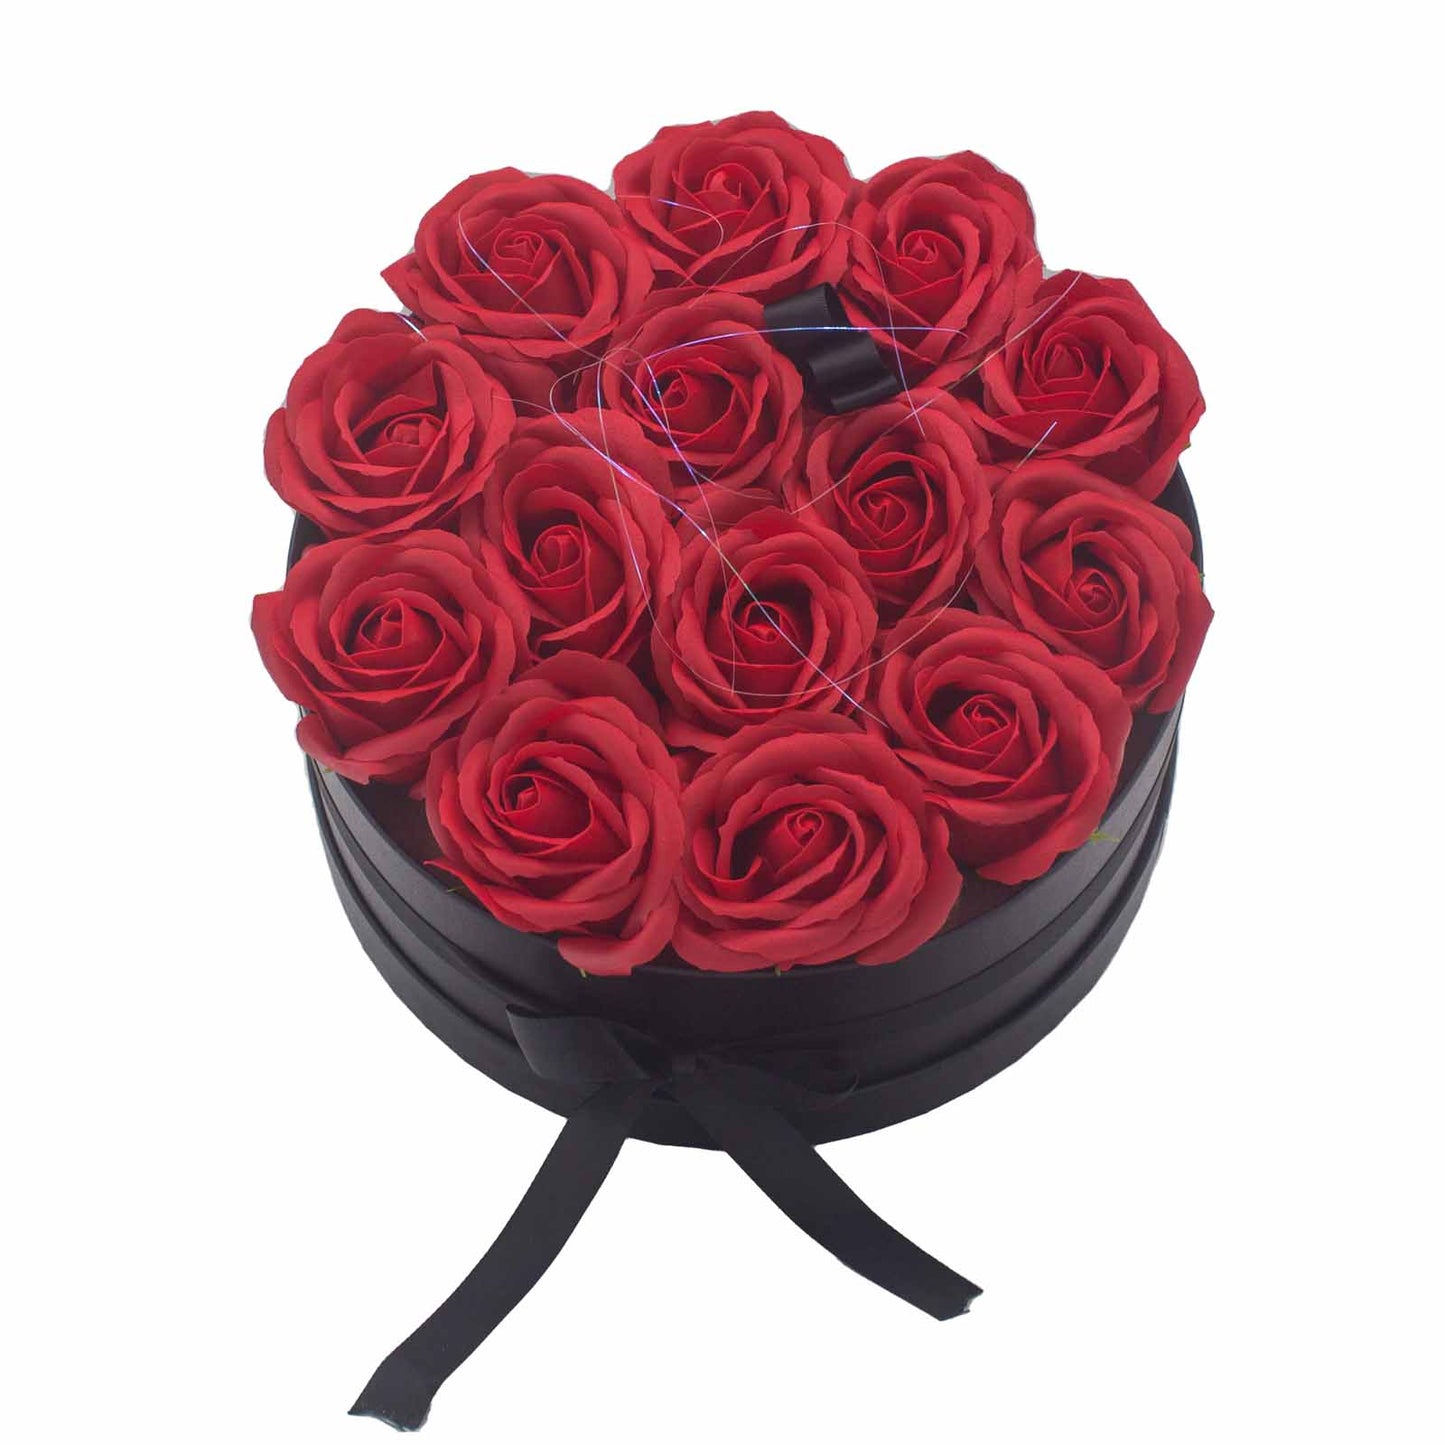 Soap Flower Bouquet - Red Roses - Round